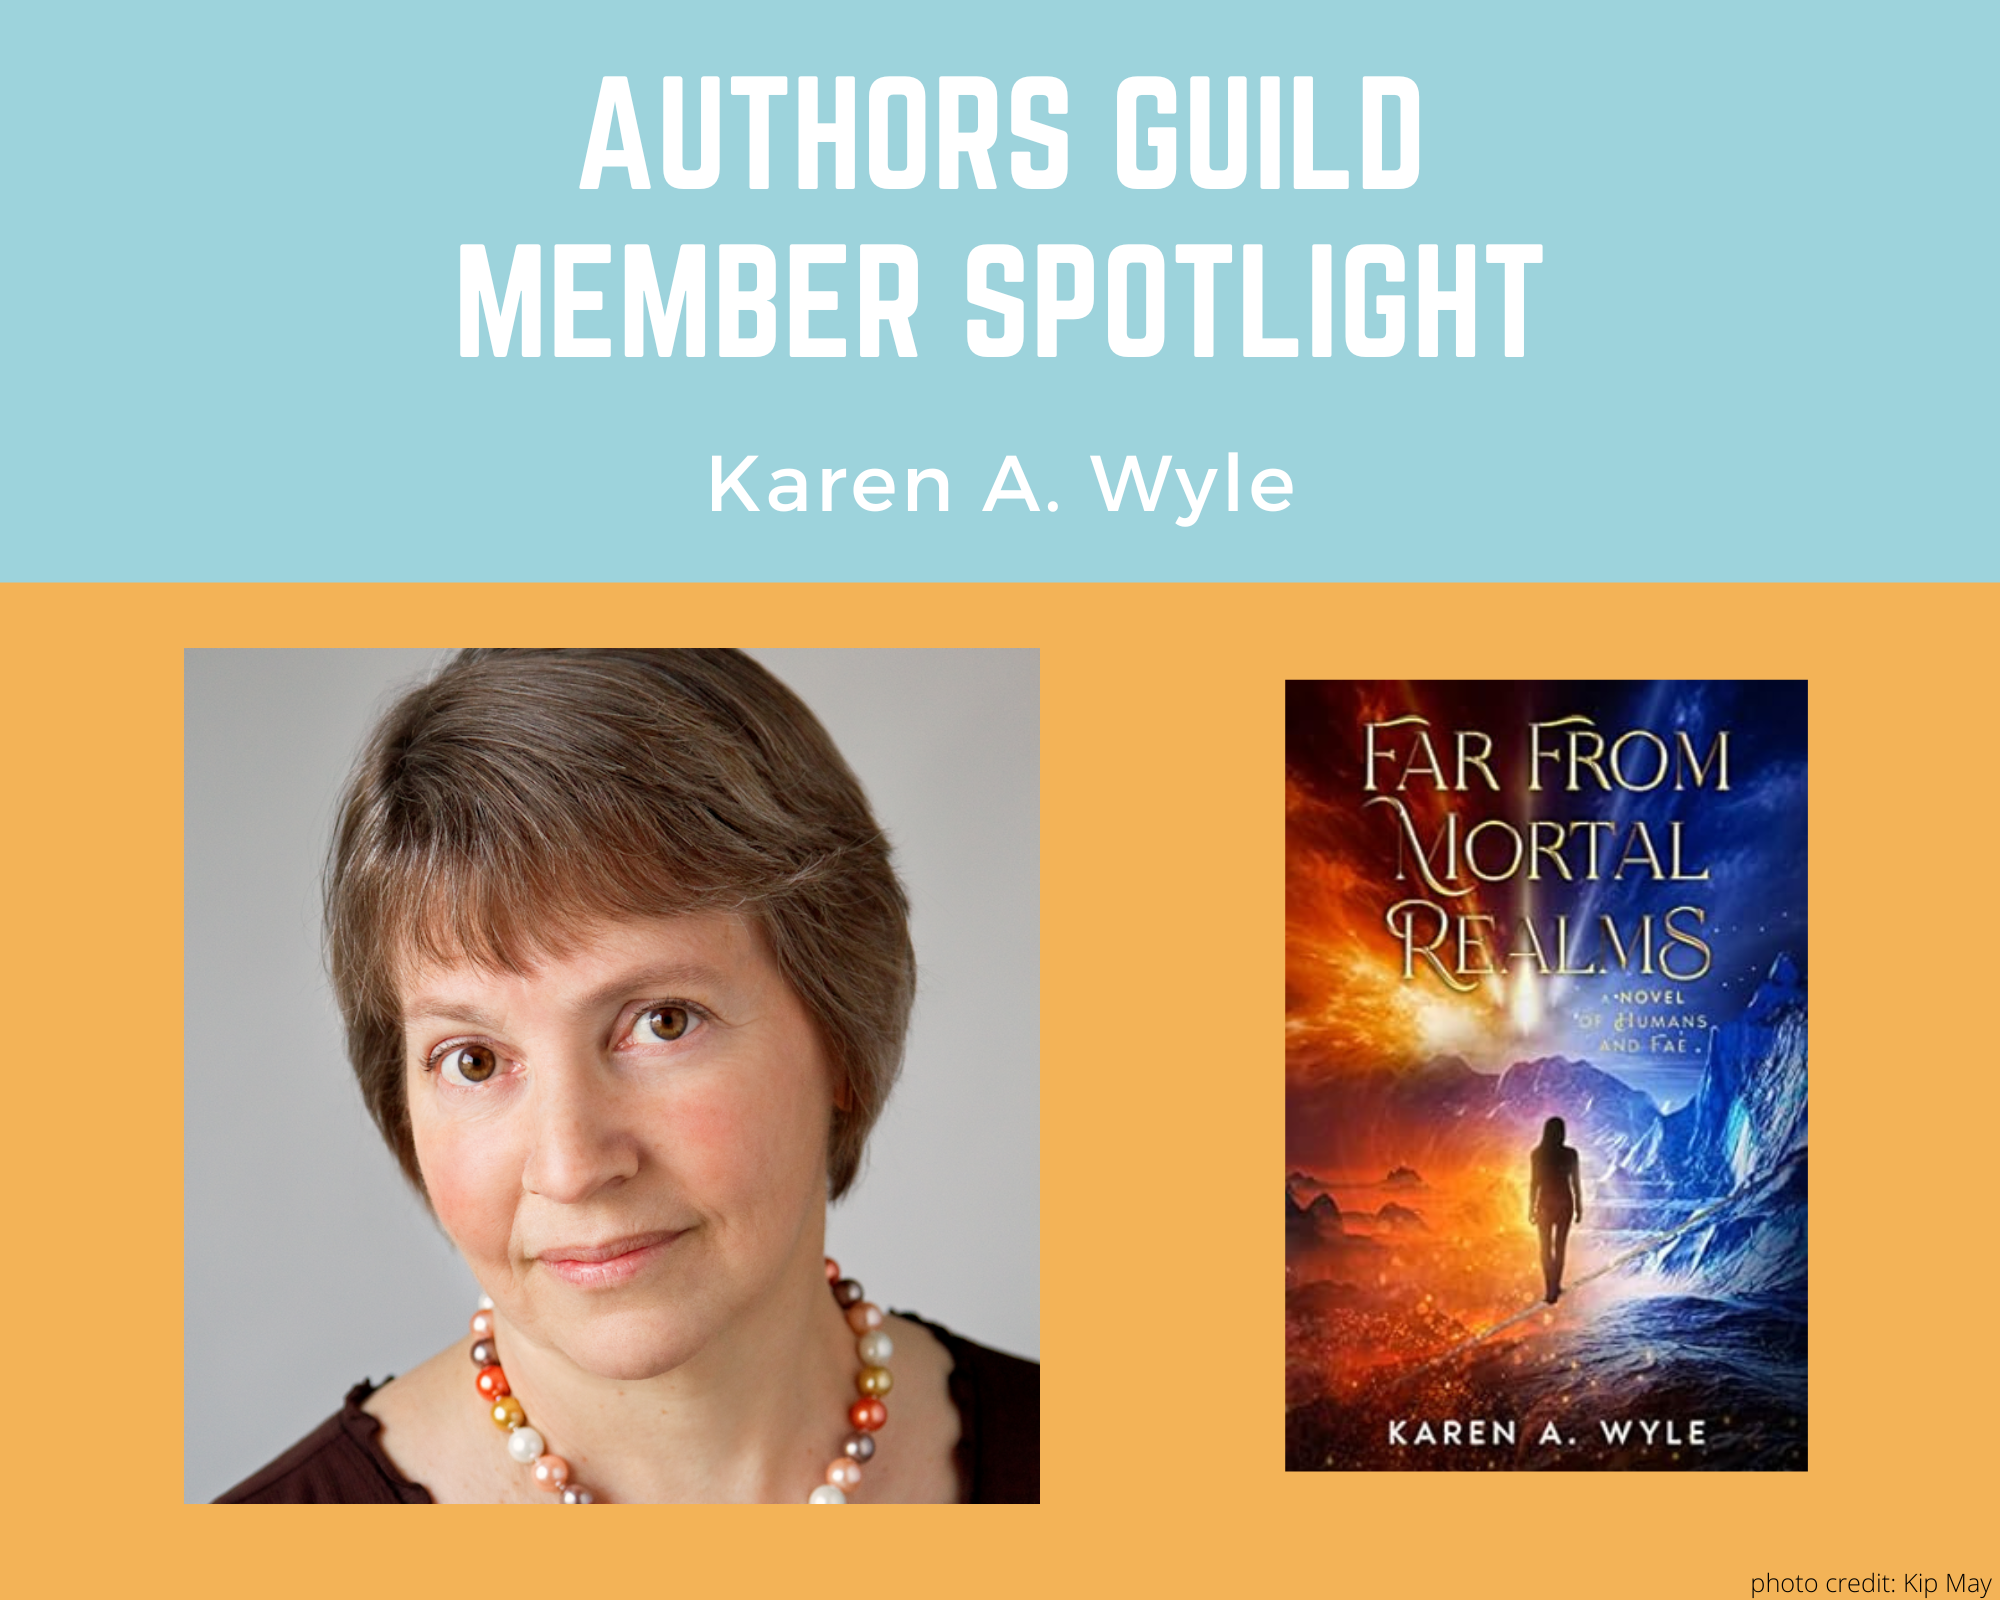 Author Karen A. Wyle and an image of her book Far from Mortal Realms